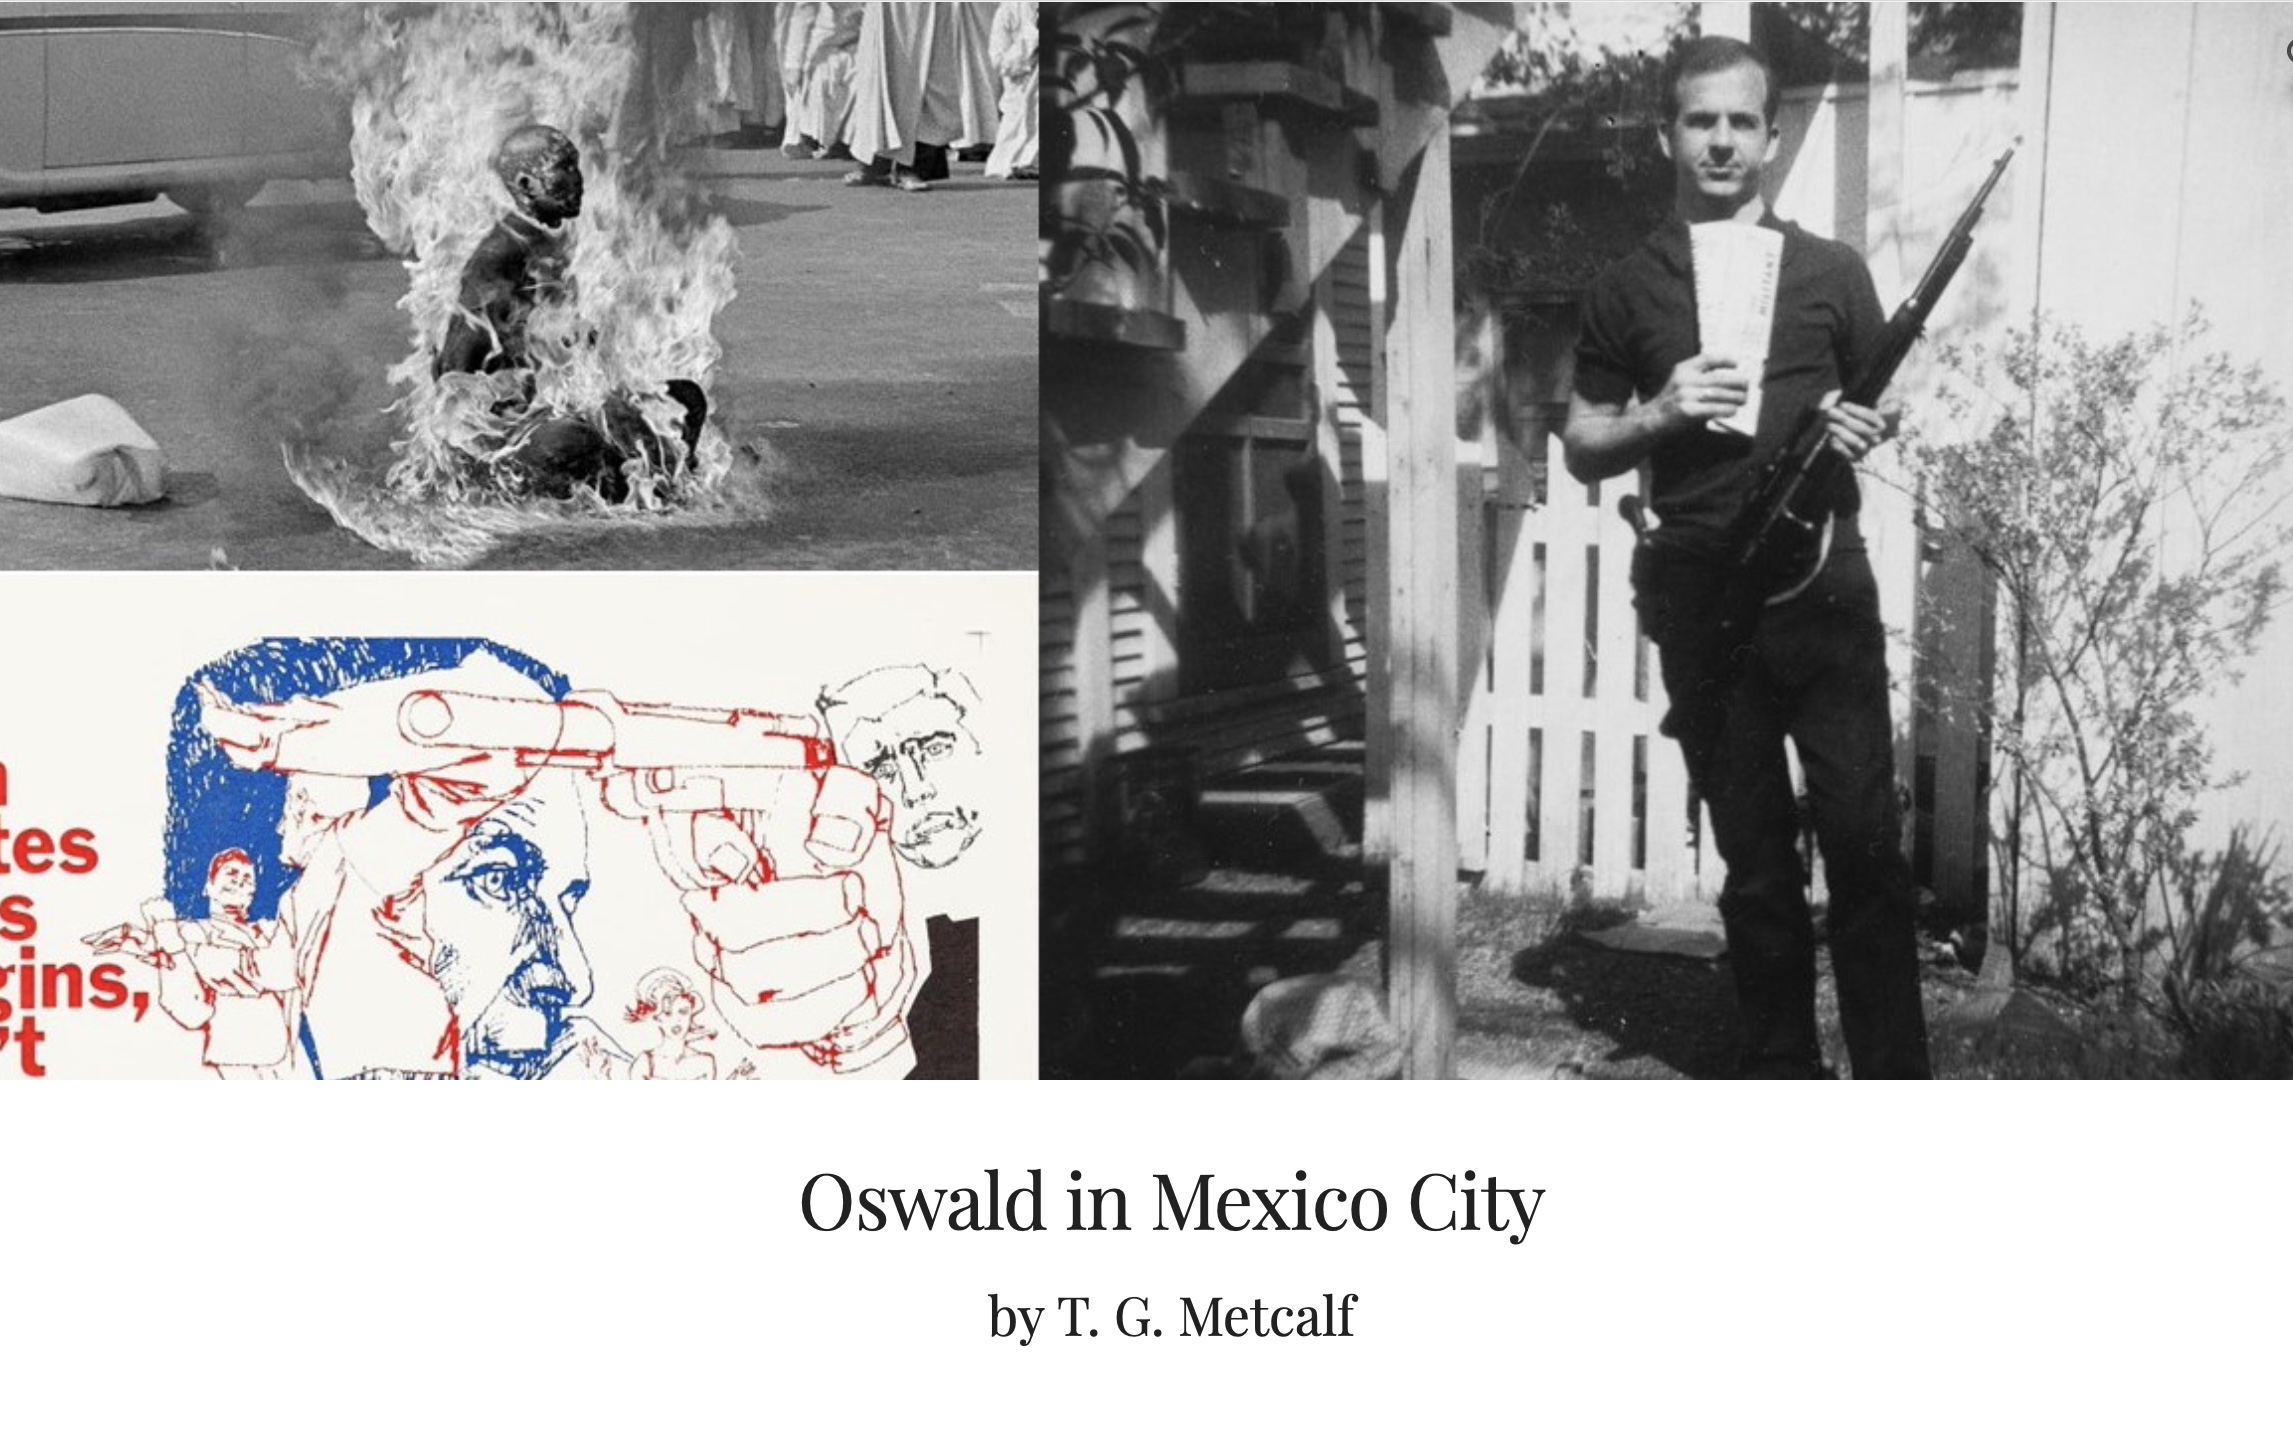 "Oswald in Mexico City," by T. G. Metcalf